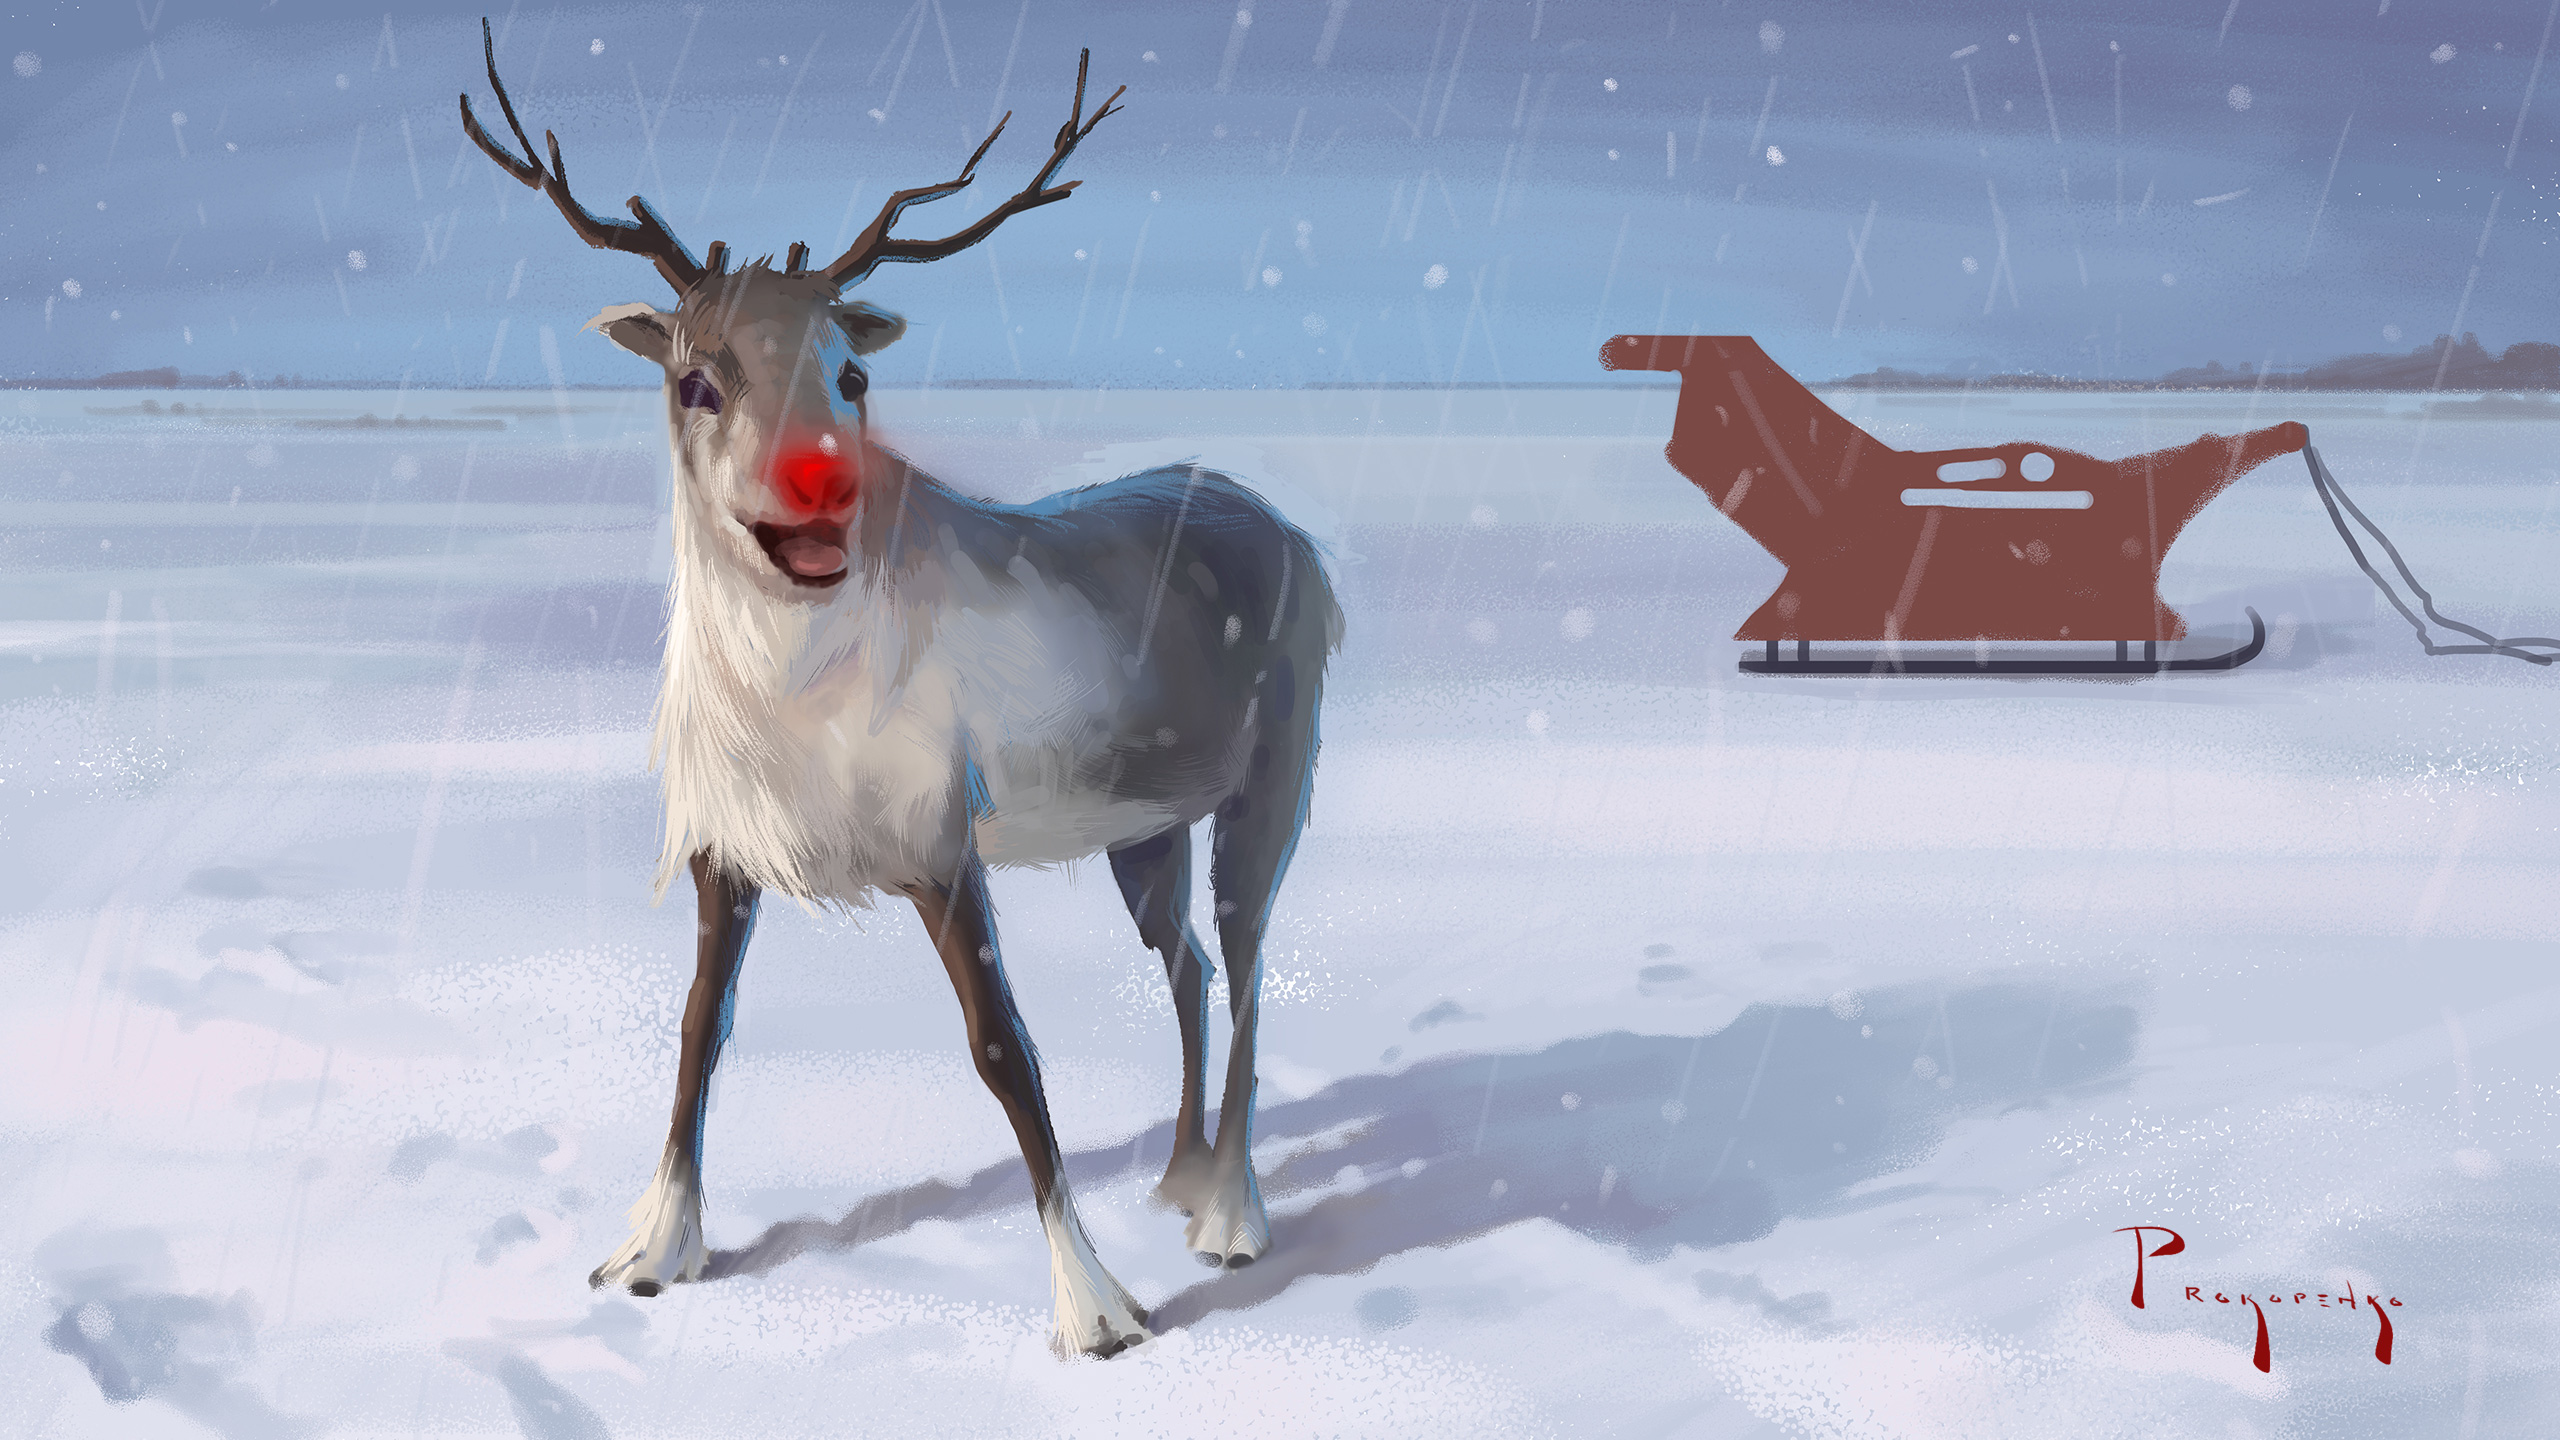 How To Digital Paint Rudolph The Red Nosed Reindeer Proko